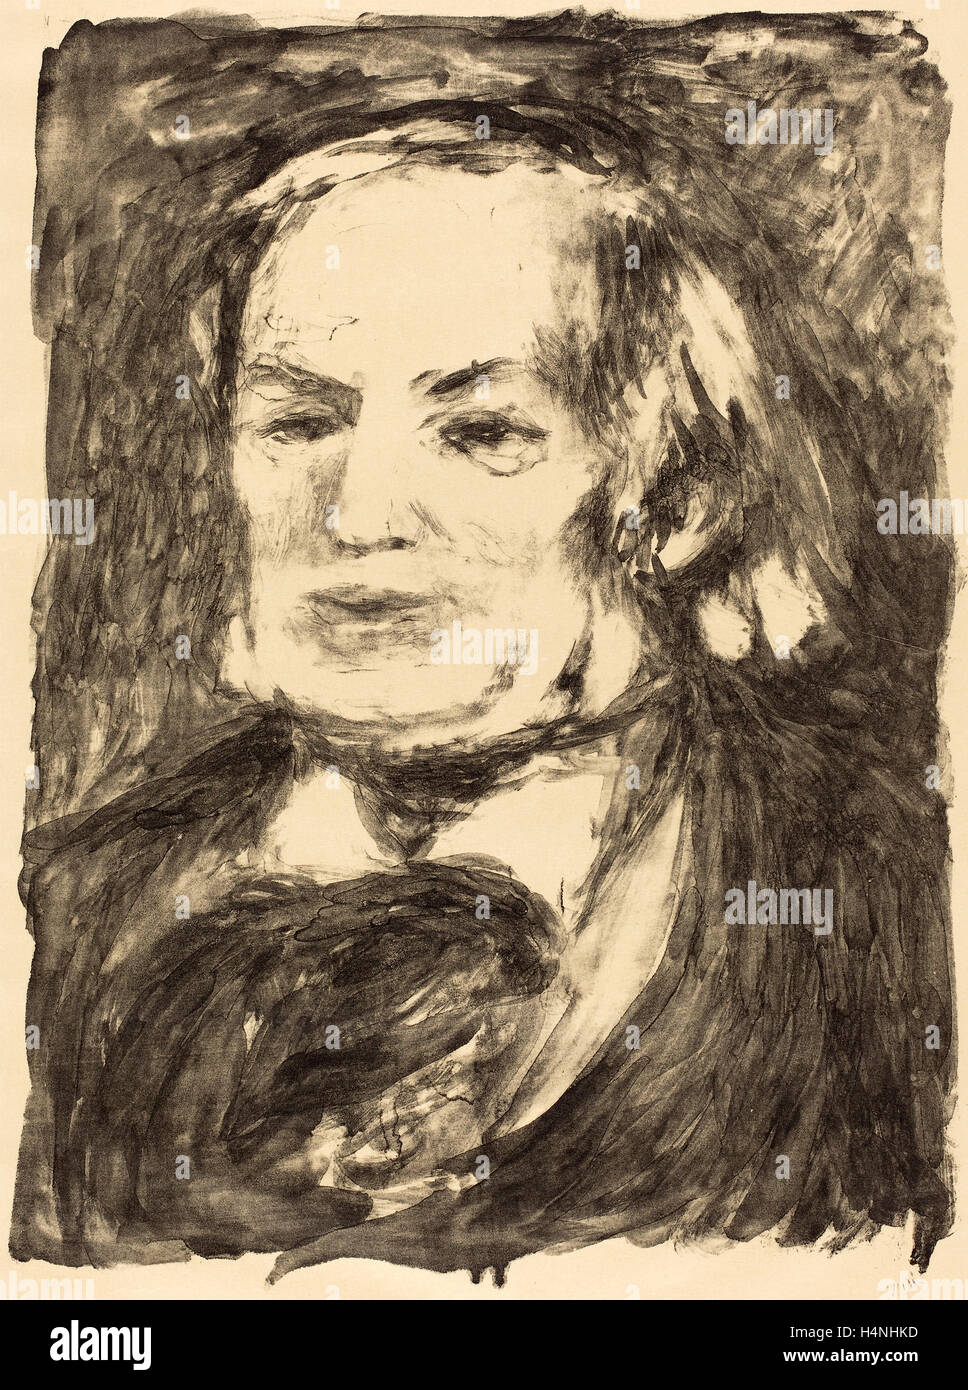 Auguste Renoir, Richard Wagner, French, 1841 - 1919, c. 1900, lithograph on japan paper Stock Photo